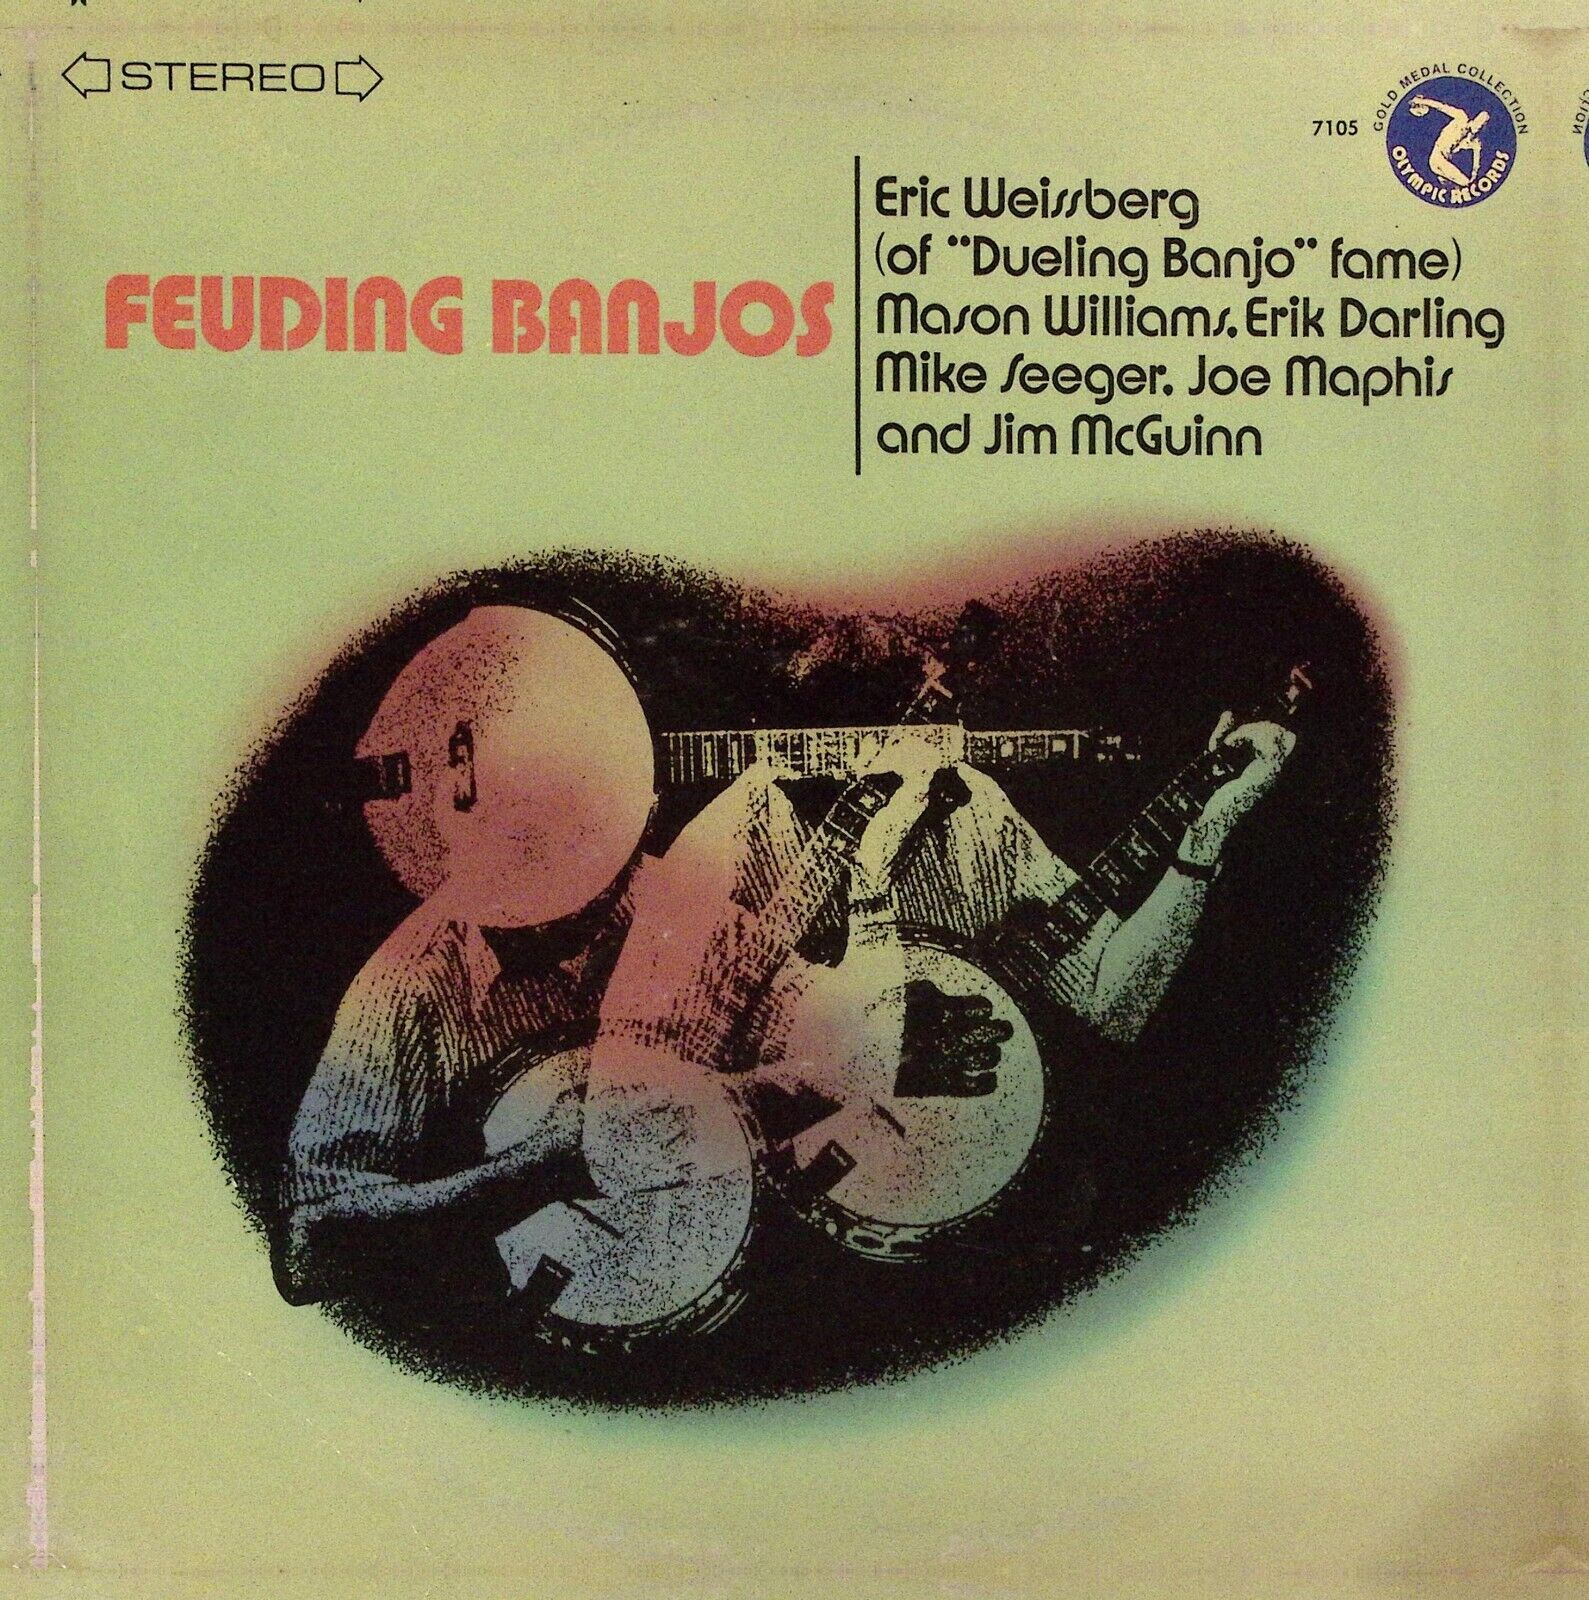 FEUDING BANJOS GOLD MEDAL RECORDS ERIC WEISSBERG MIKE SEEGER ++ VINYL LP 189-27